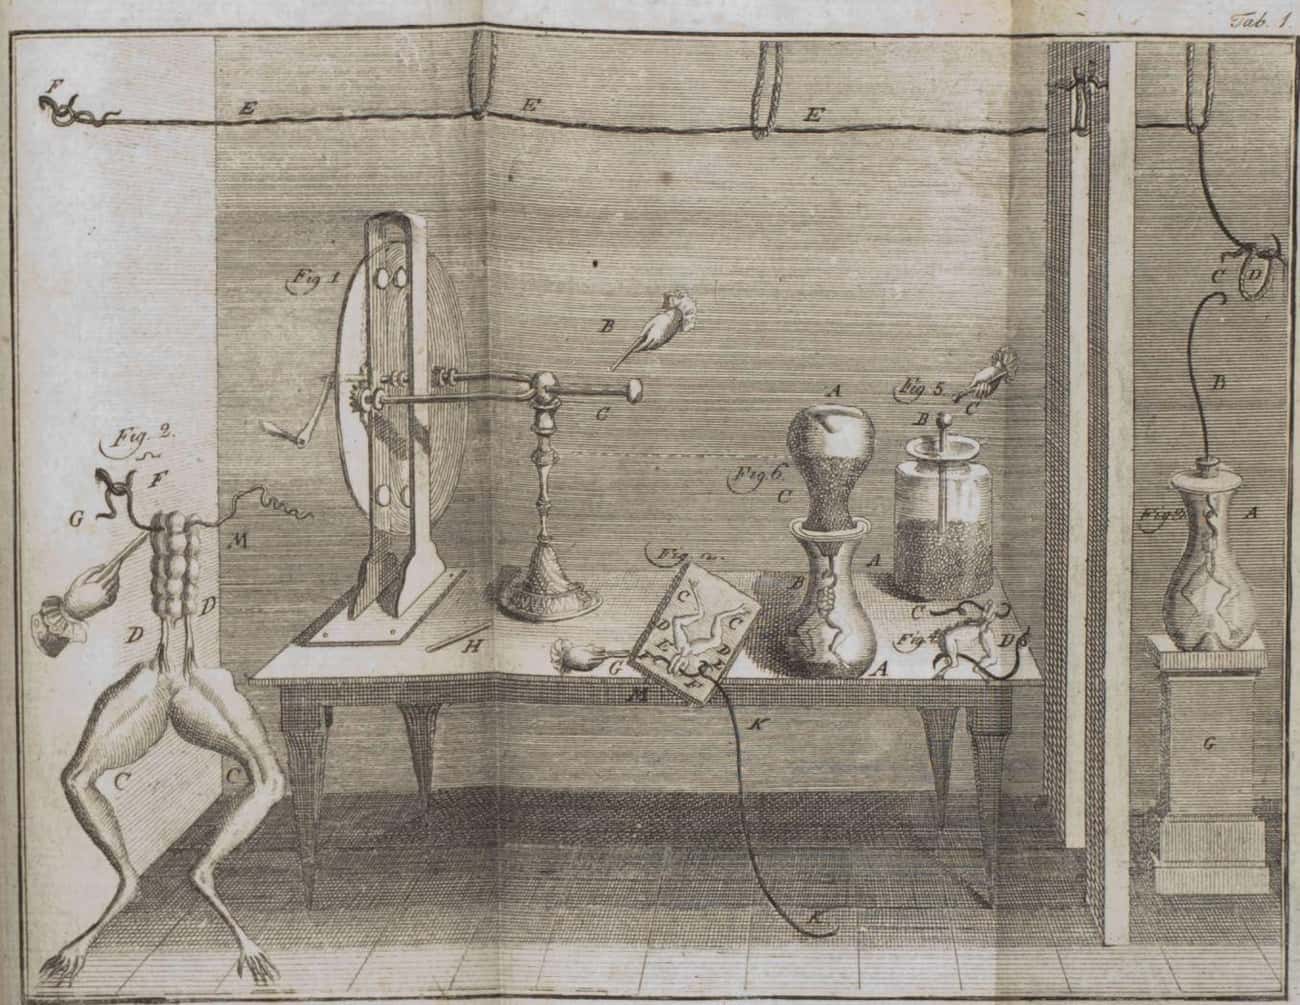 At First, Scientists Practiced Galvanism On Animals, Including Frogs And Kittens